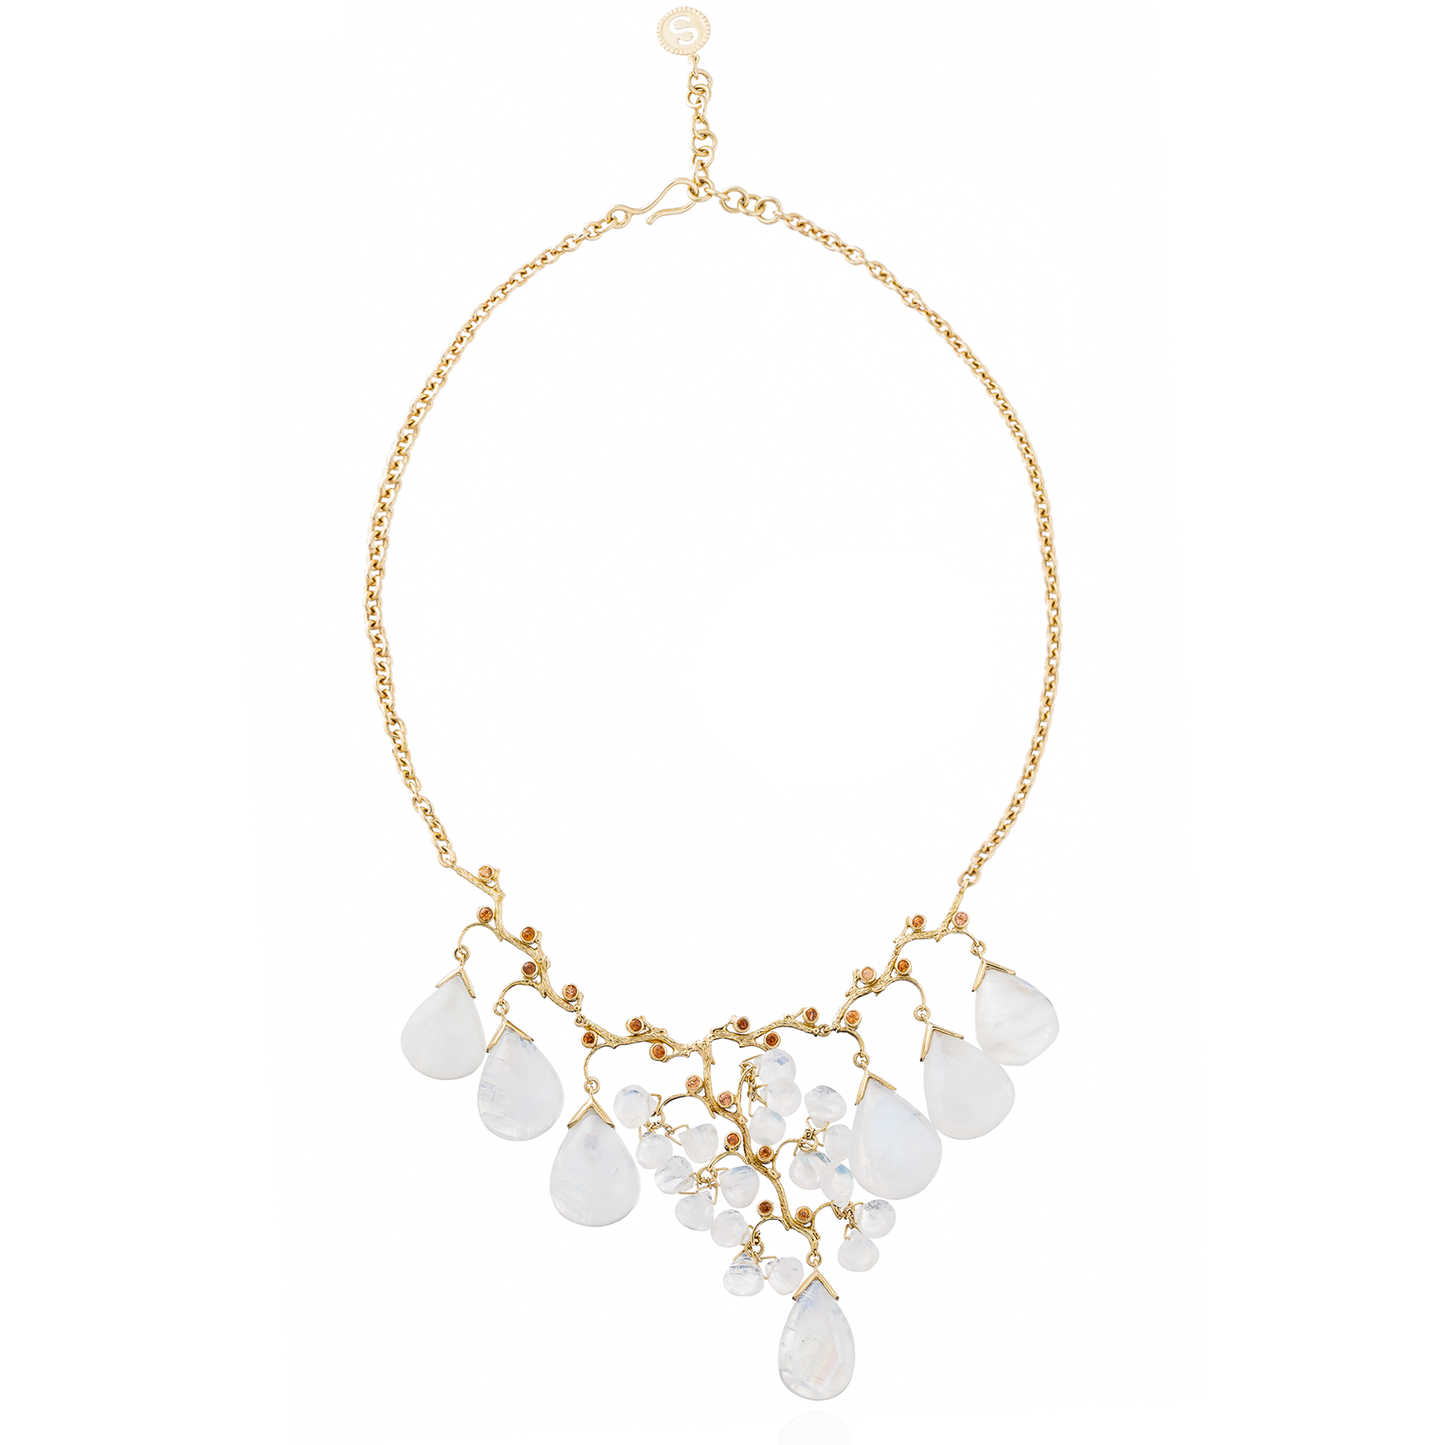 18K Yellow Gold Necklace with Moonstone Cabochon Drops